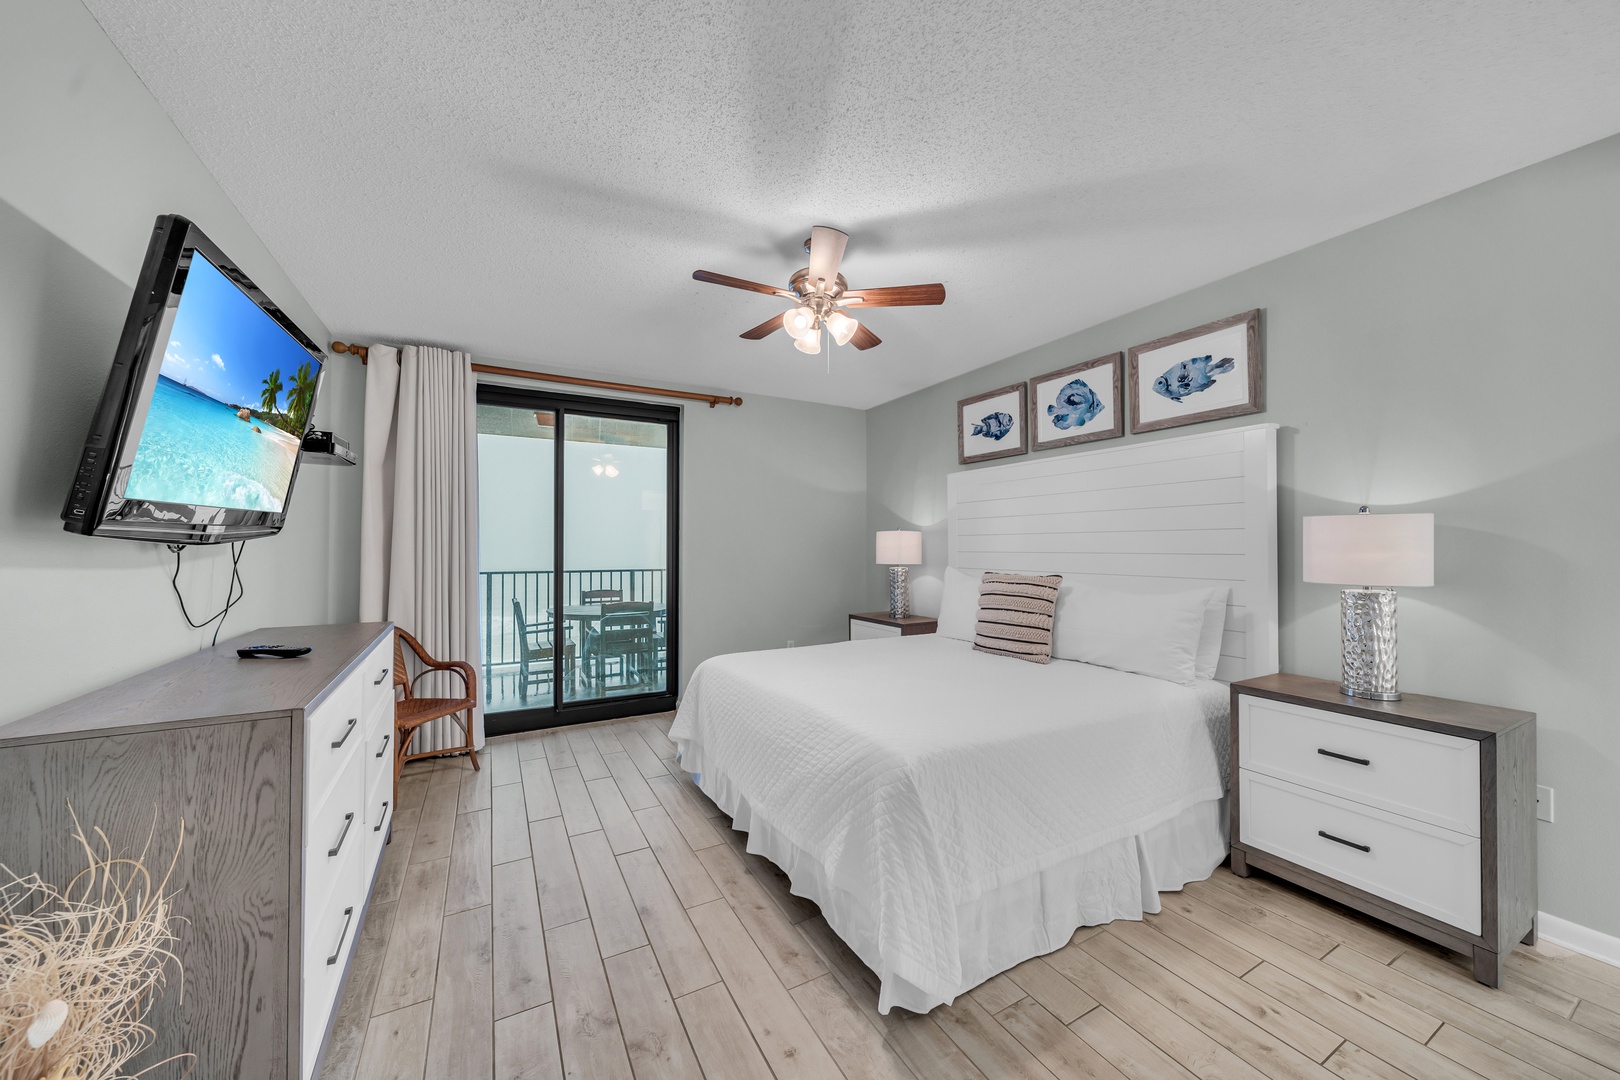 The Primary Bedroom, a serene sanctuary, also features sliding glass doors opening onto the balcony with Gulf views.